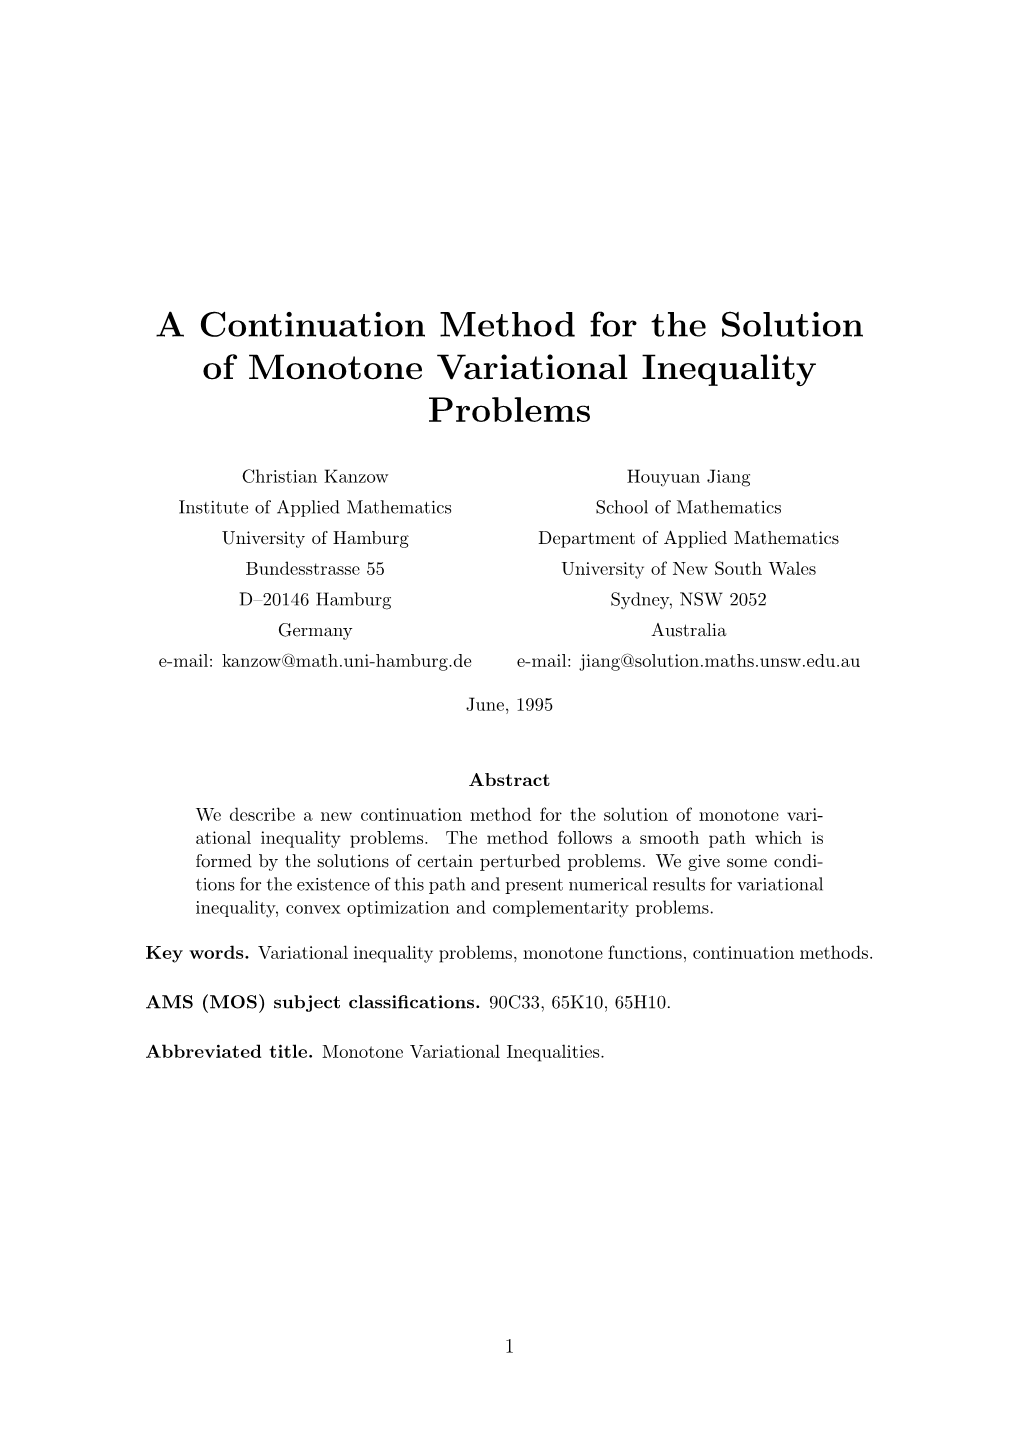 A Continuation Method for the Solution of Monotone Variational Inequality Problems